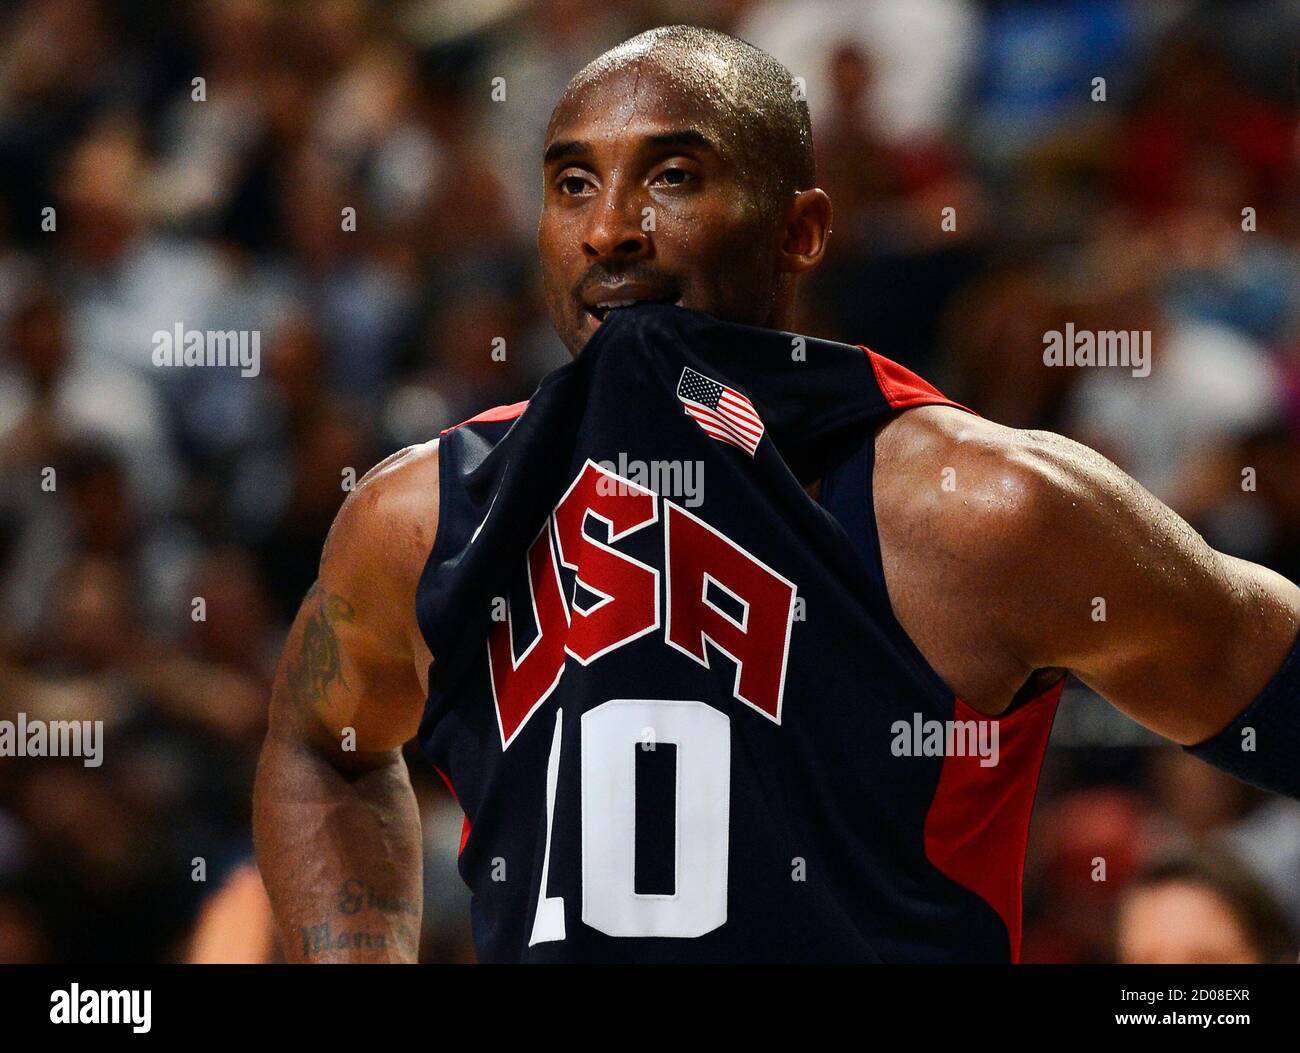 Kobe Bryant Of Team Usa Reacts During Their Olympic Men S Exhibition Basketball Game Against Team Gb Ahead Of The London 12 Olympic Games At The M E N Arena In Manchester Northern England July